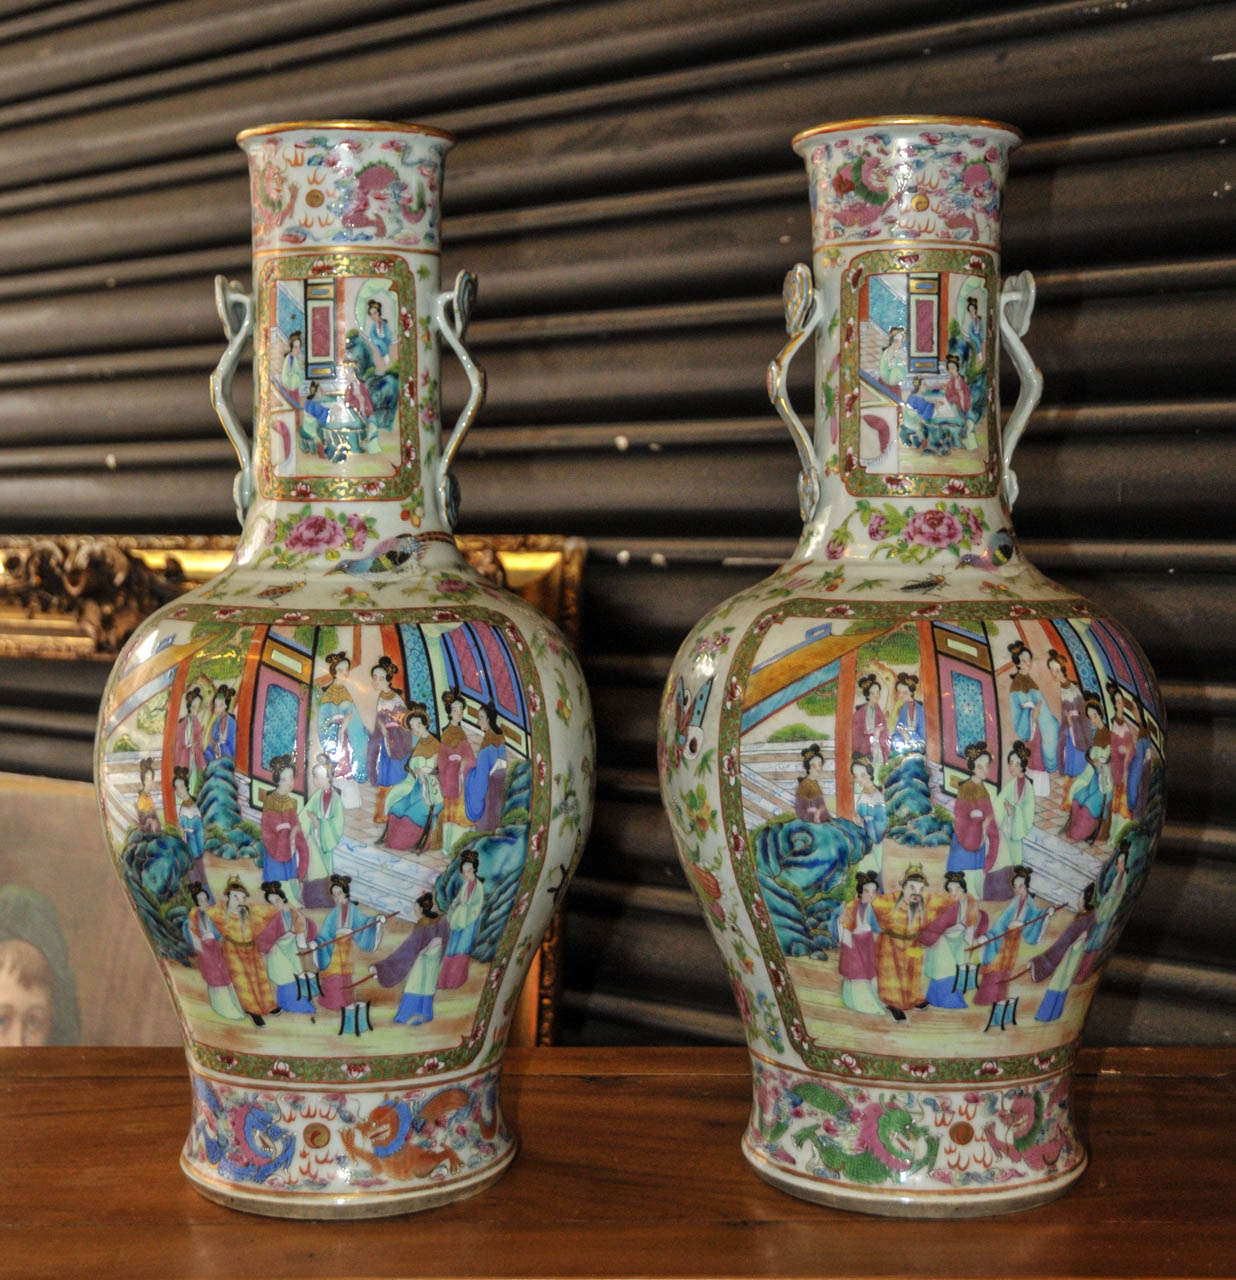 19th Century pair of large polychrome earthenware Cantonese (China) vases. Ruyi shape handles. Very good condition. Normal wear consistent with age and use.